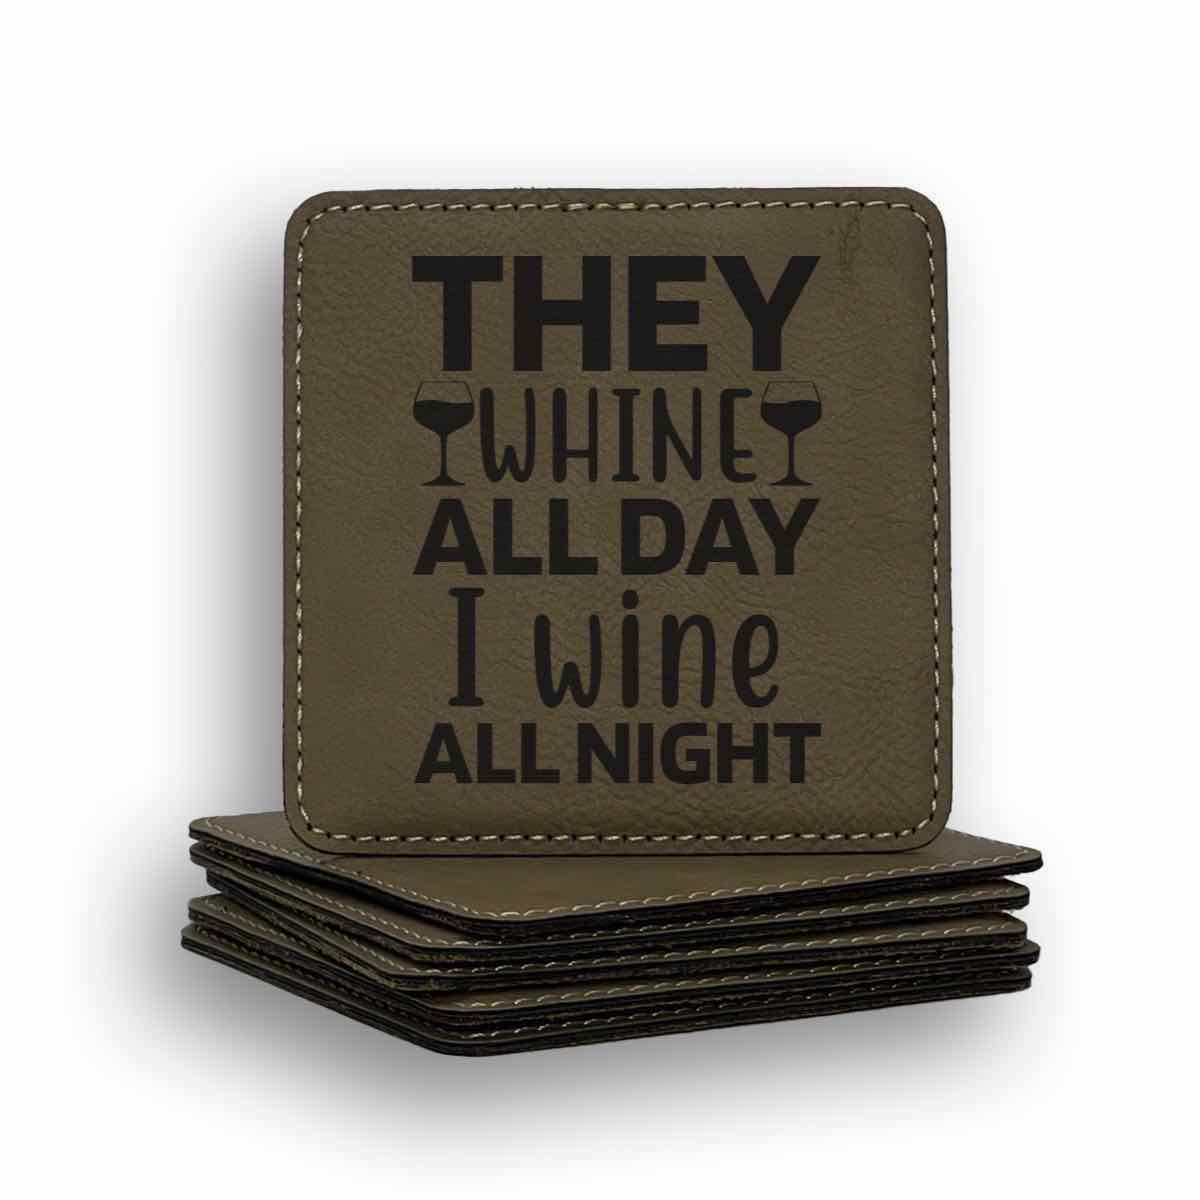 They Whine All Day I Wine All Night Coaster